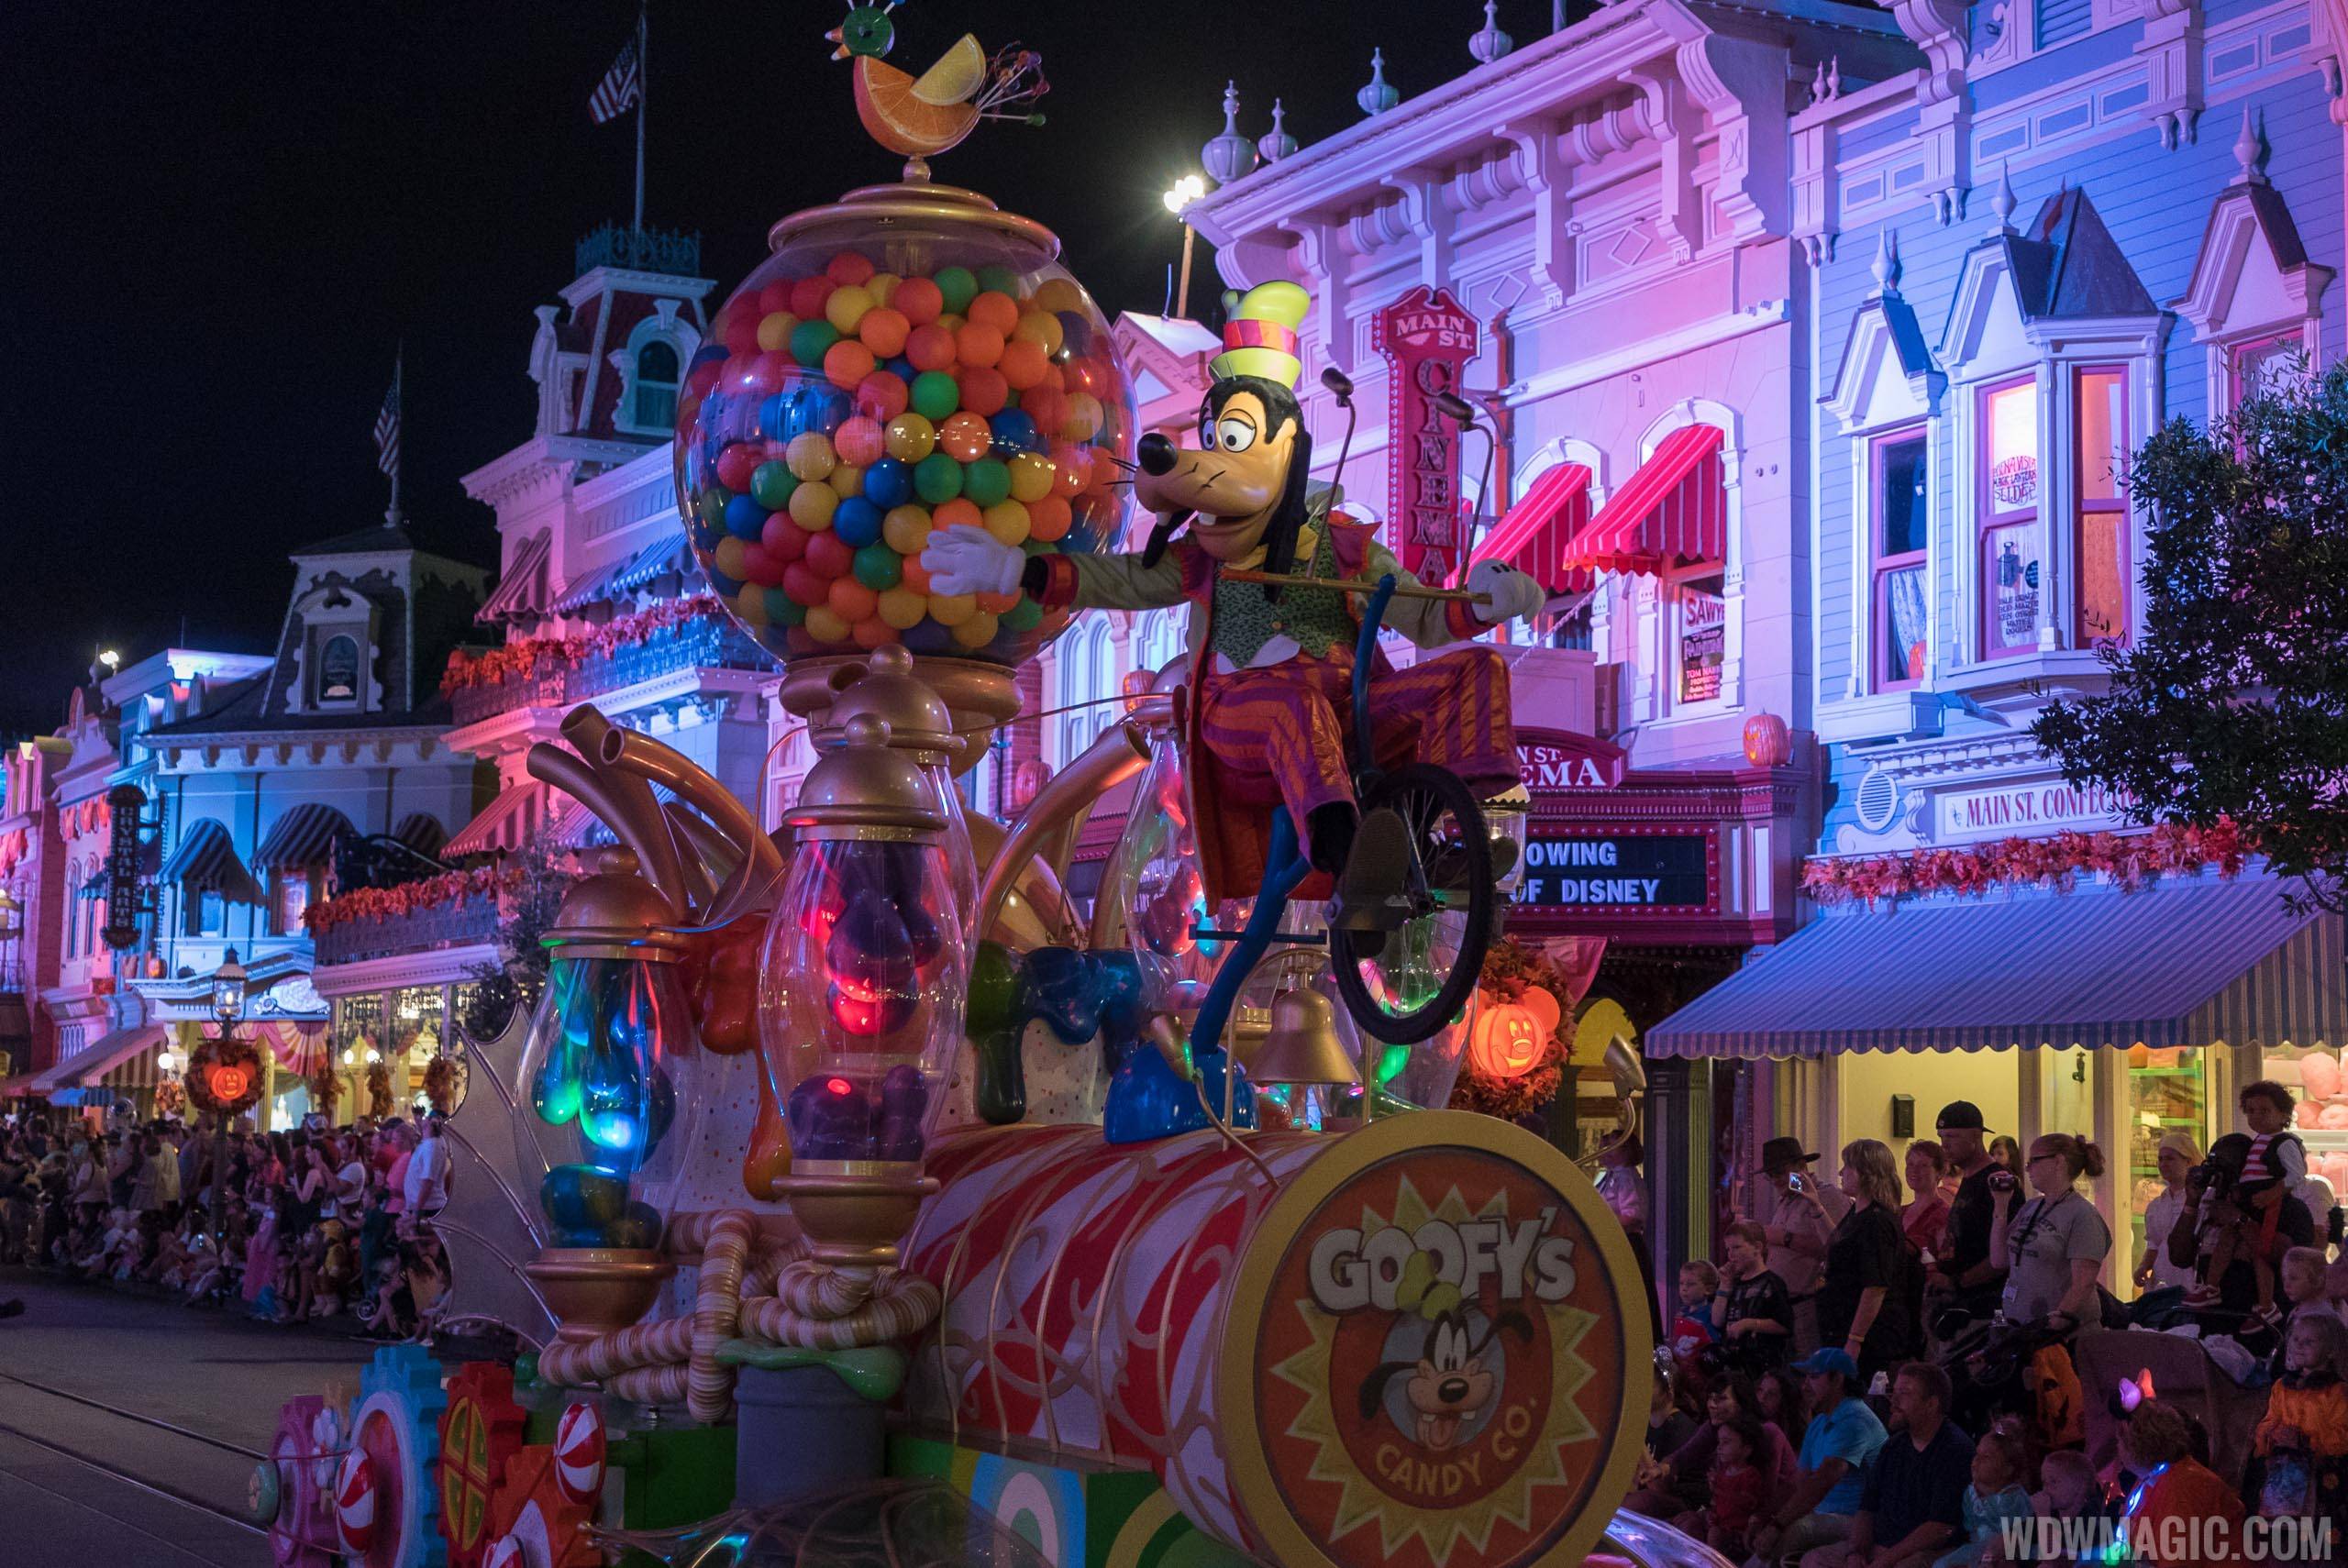 Mickey's Boo to You Halloween Parade - Goofy's Candy Co Float